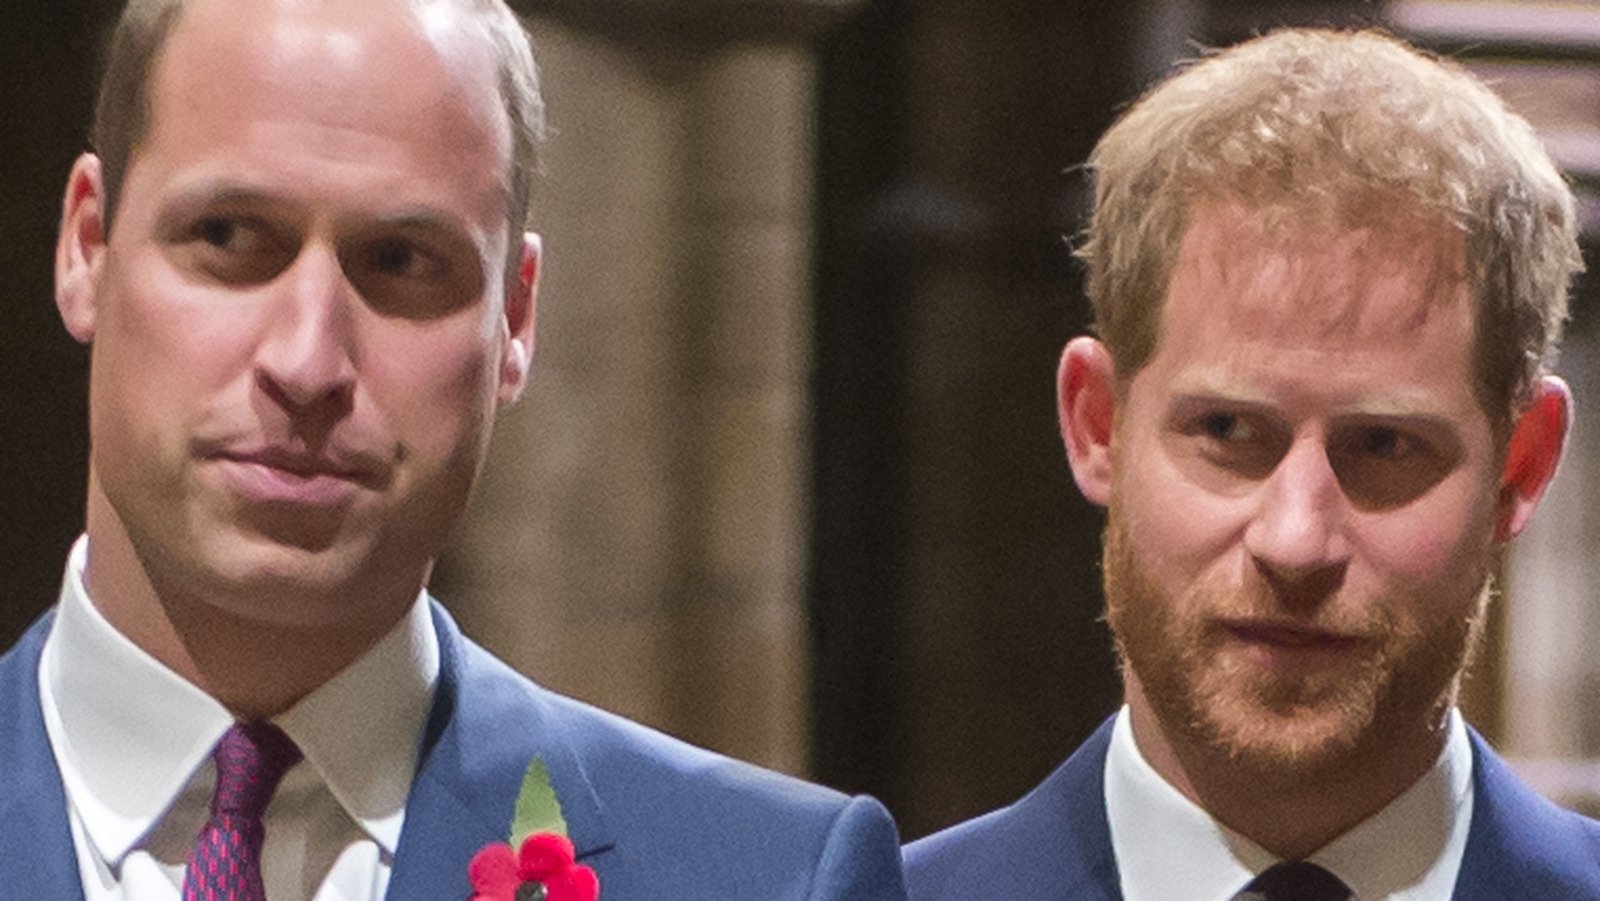 How Old Were Prince William And Prince Harry When Princess Diana Died?